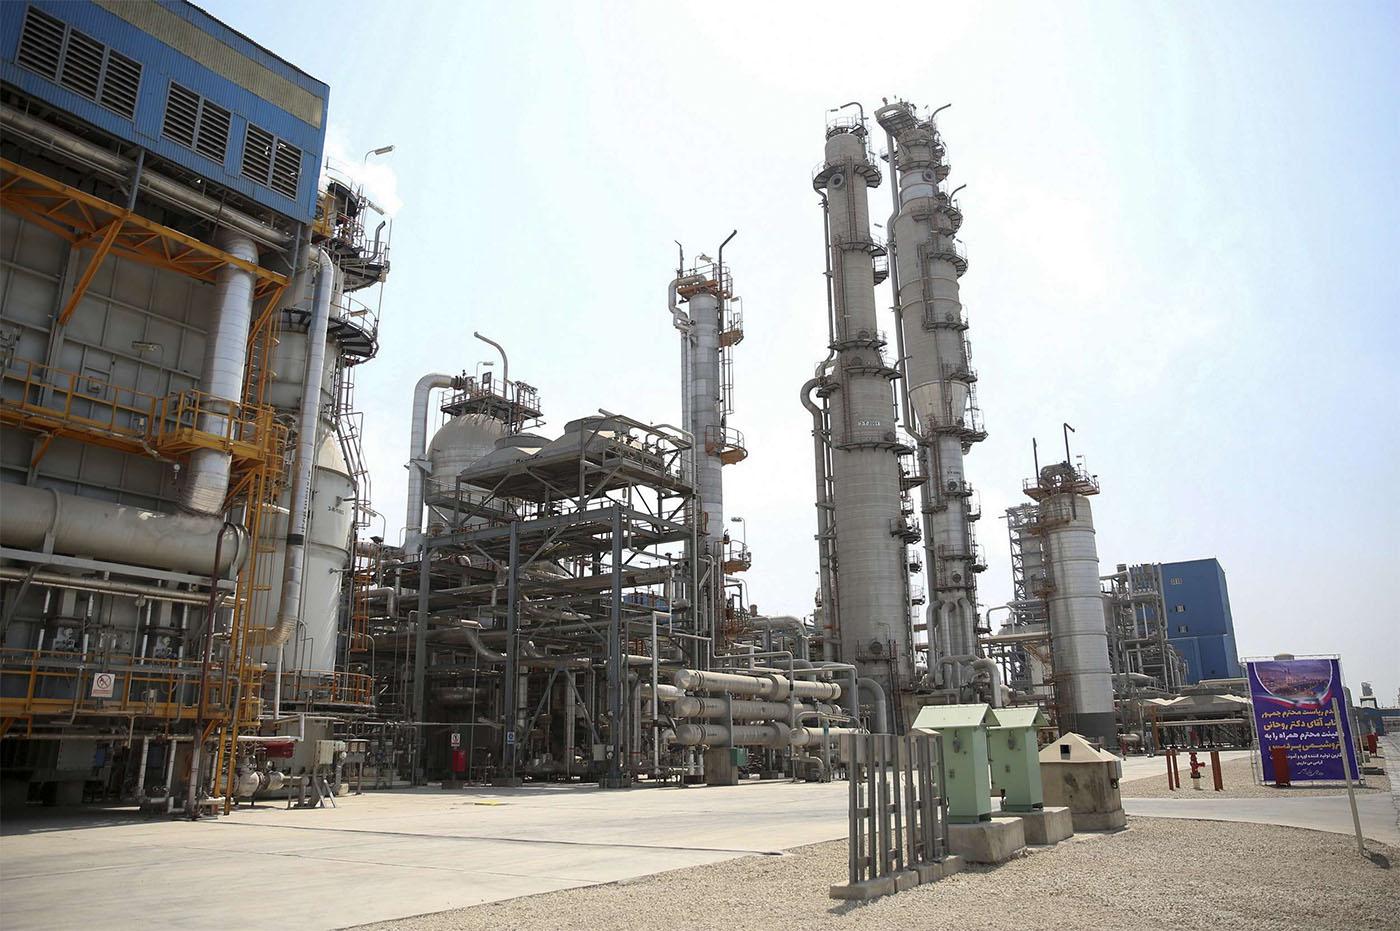 Part of Pardis petrochemical complex facilities in Assalouyeh on the northern coast of the Persian Gulf, Iran